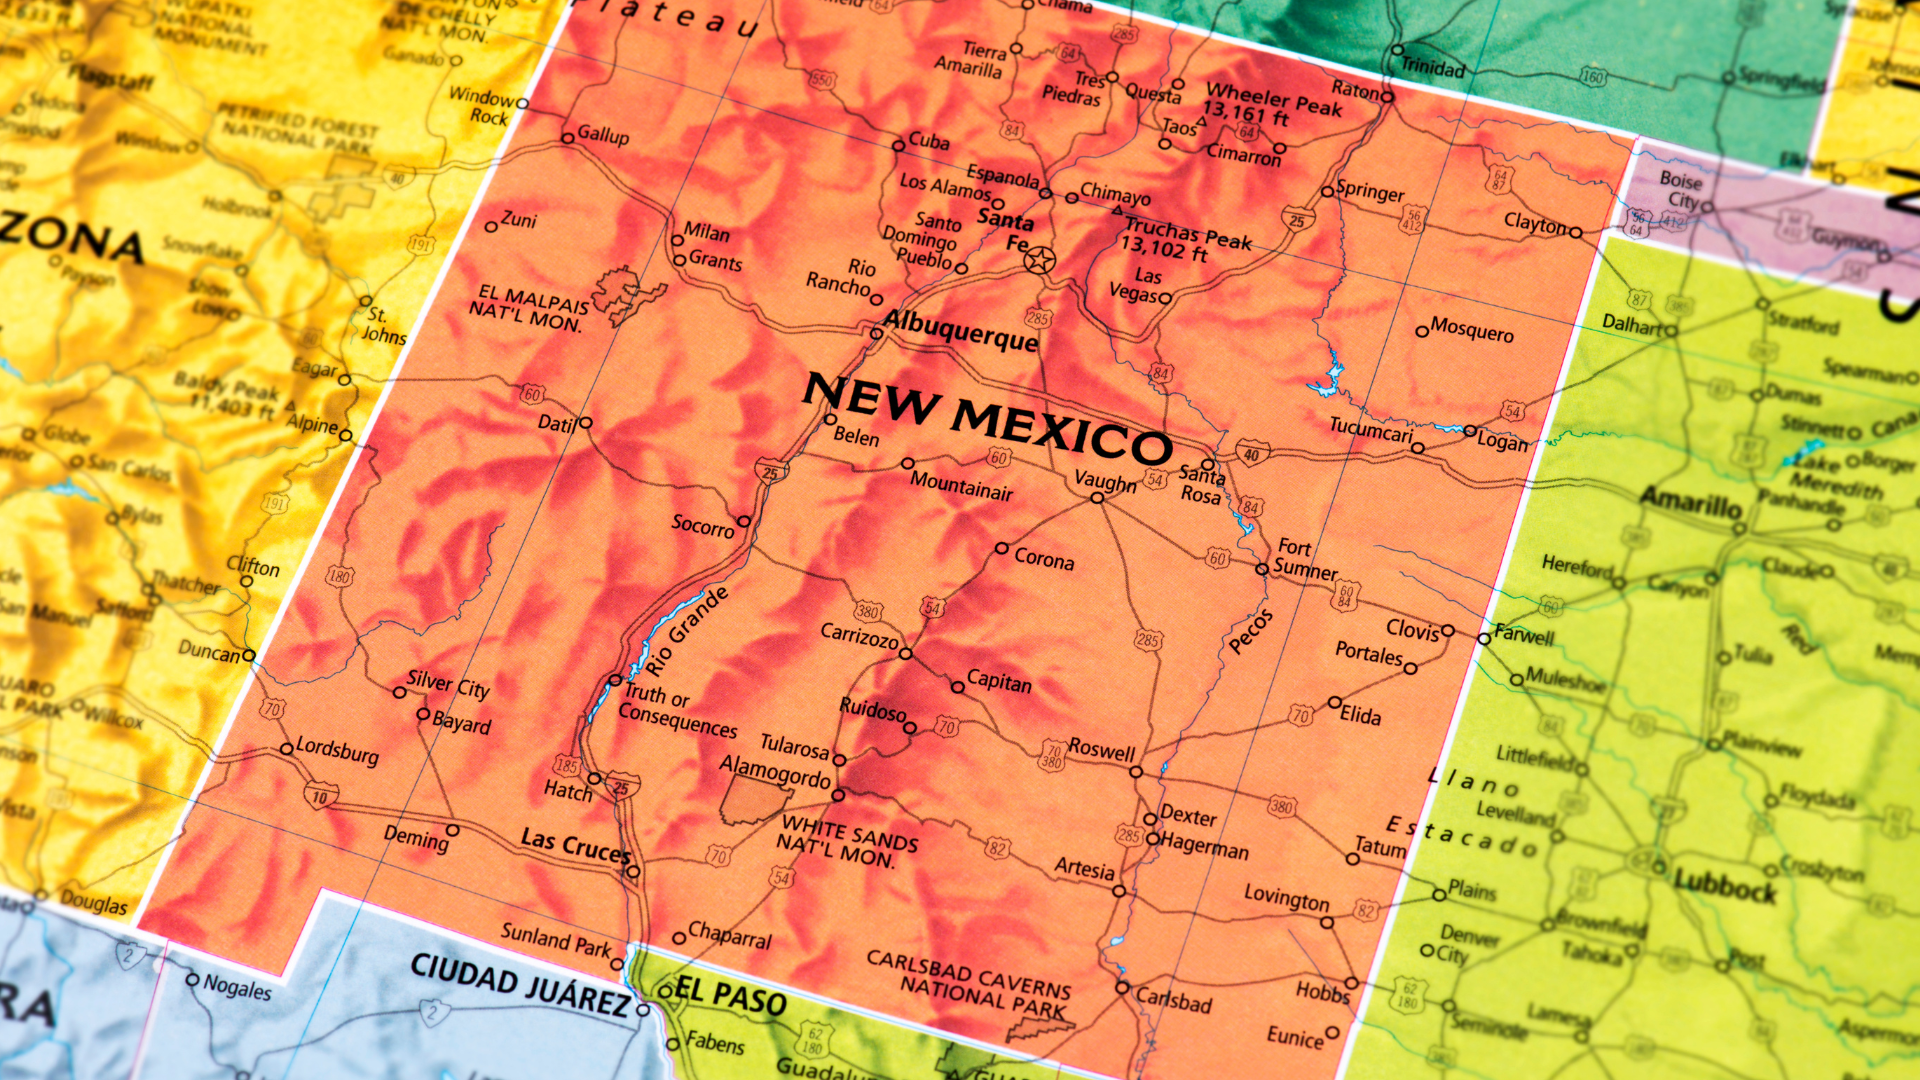 NM Supreme Court Upholds Redrawn Congressional Map